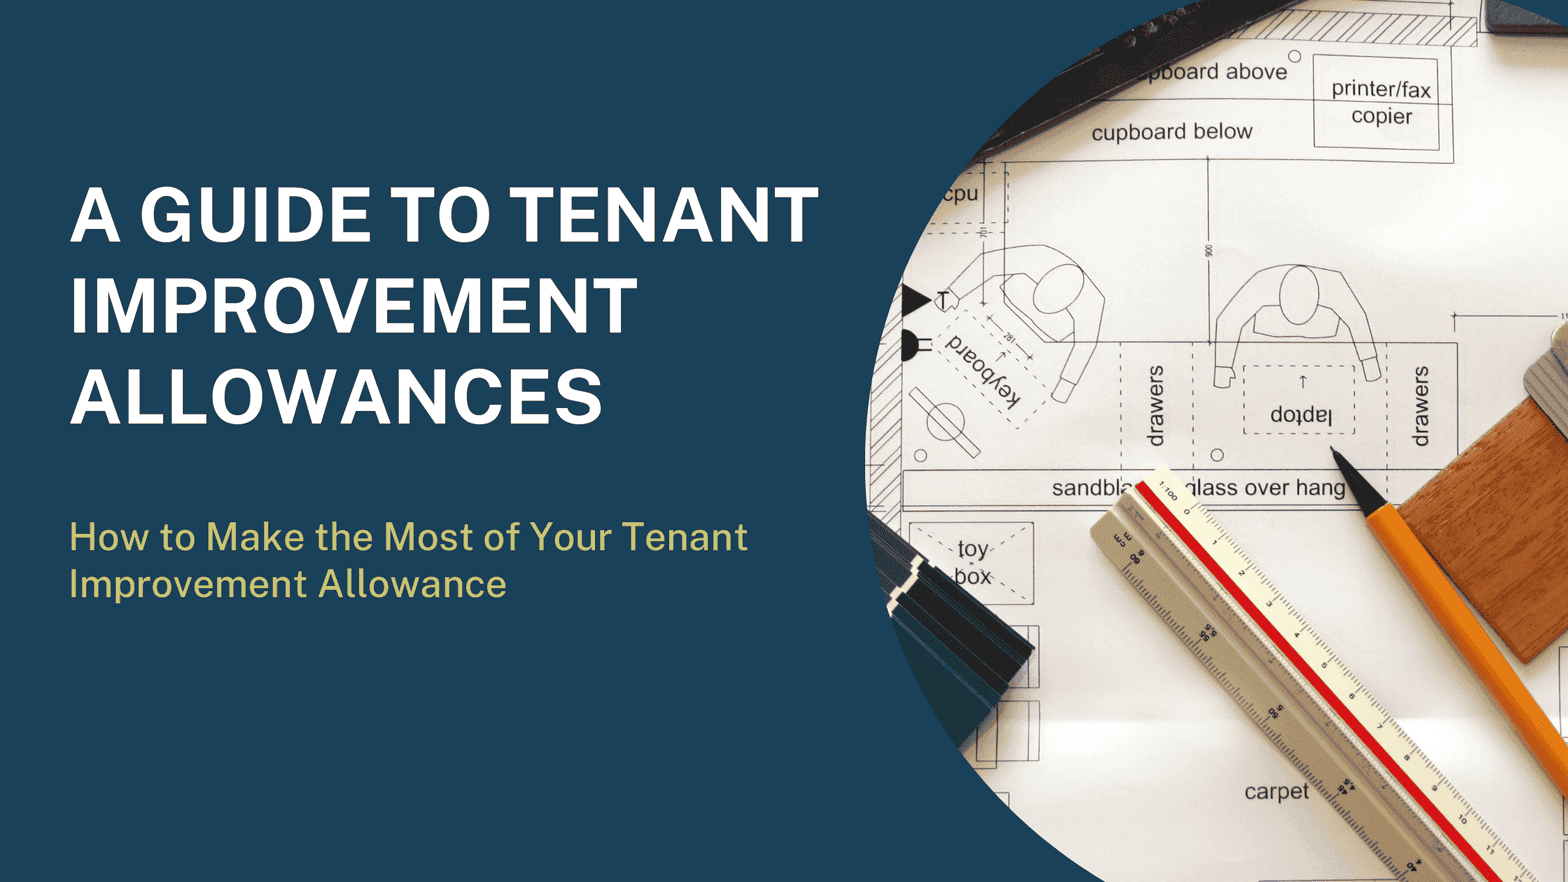 A Guide to Tenant Improvement Allowances: Tenant Improvements in Commercial Real Estate